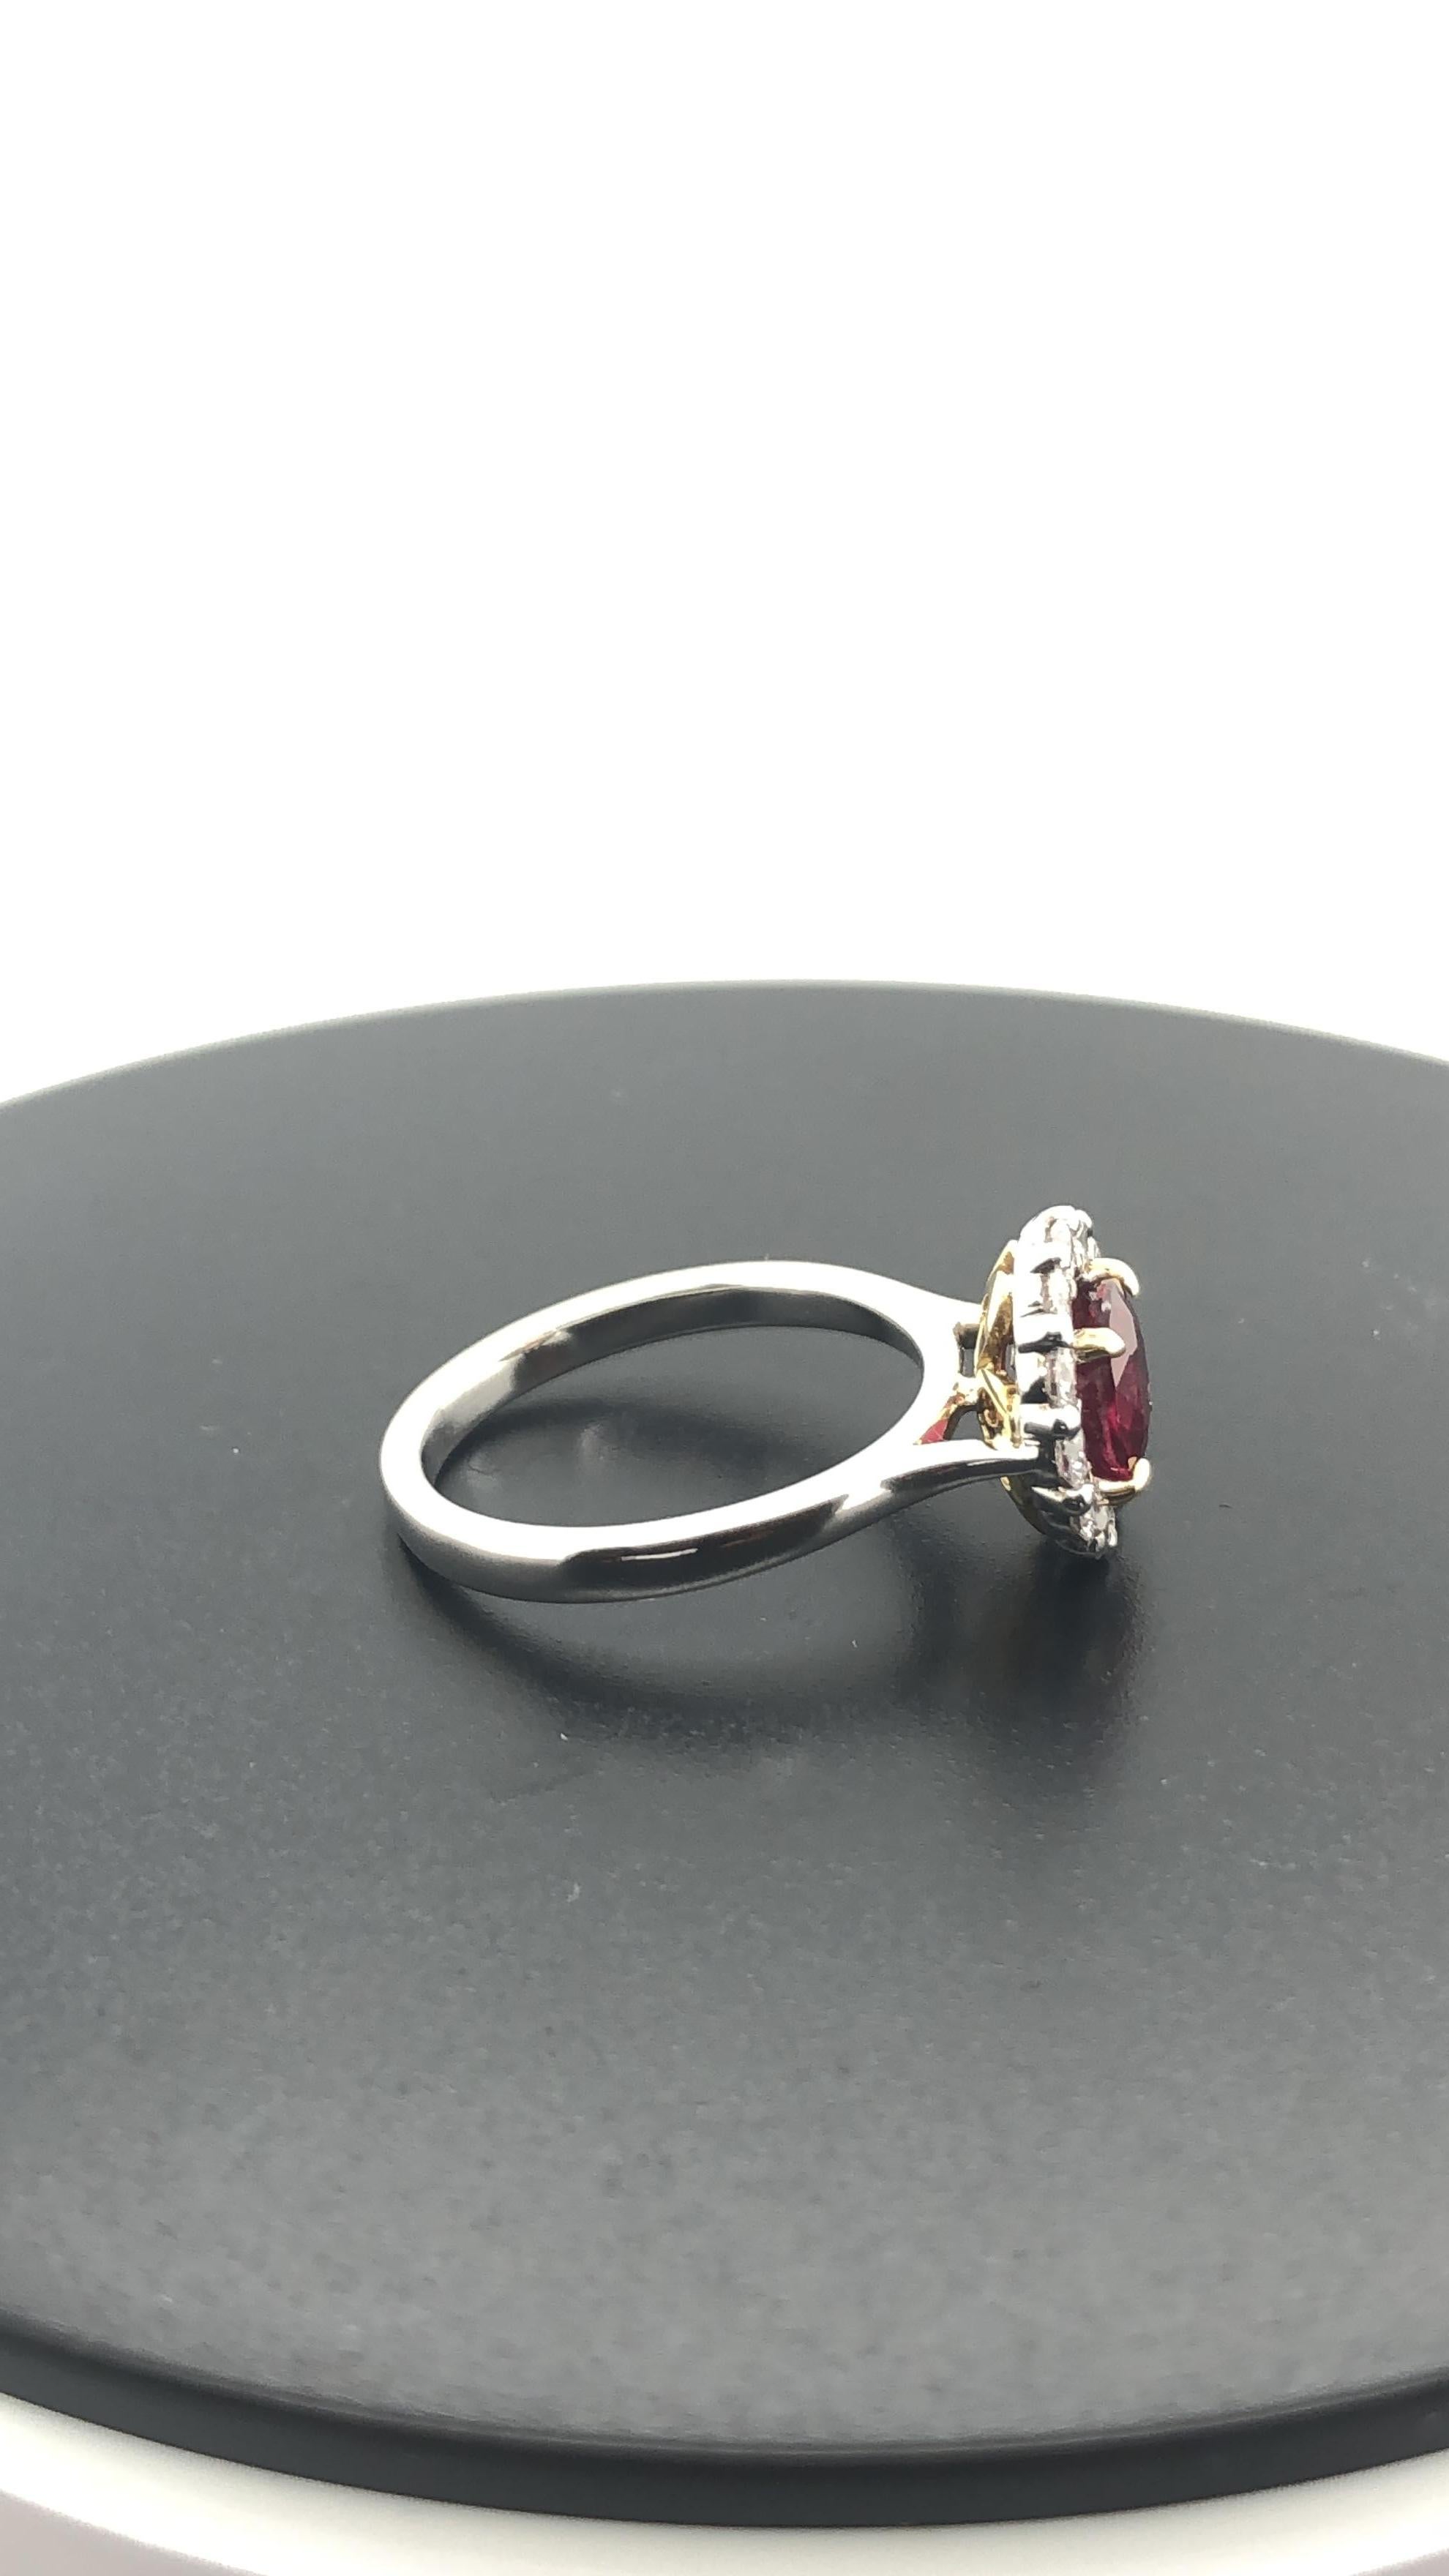 Hand Crafted 18 Carat Yellow and White gold Ring, Set with a Certified, Natural 'Deep Red' Mozambique 1.58 carat Round Ruby as per GSL # AA61057, set in Yellow gold claws, surrounded by 12 round brilliant cut white diamonds, weighing 0.60 carat, F